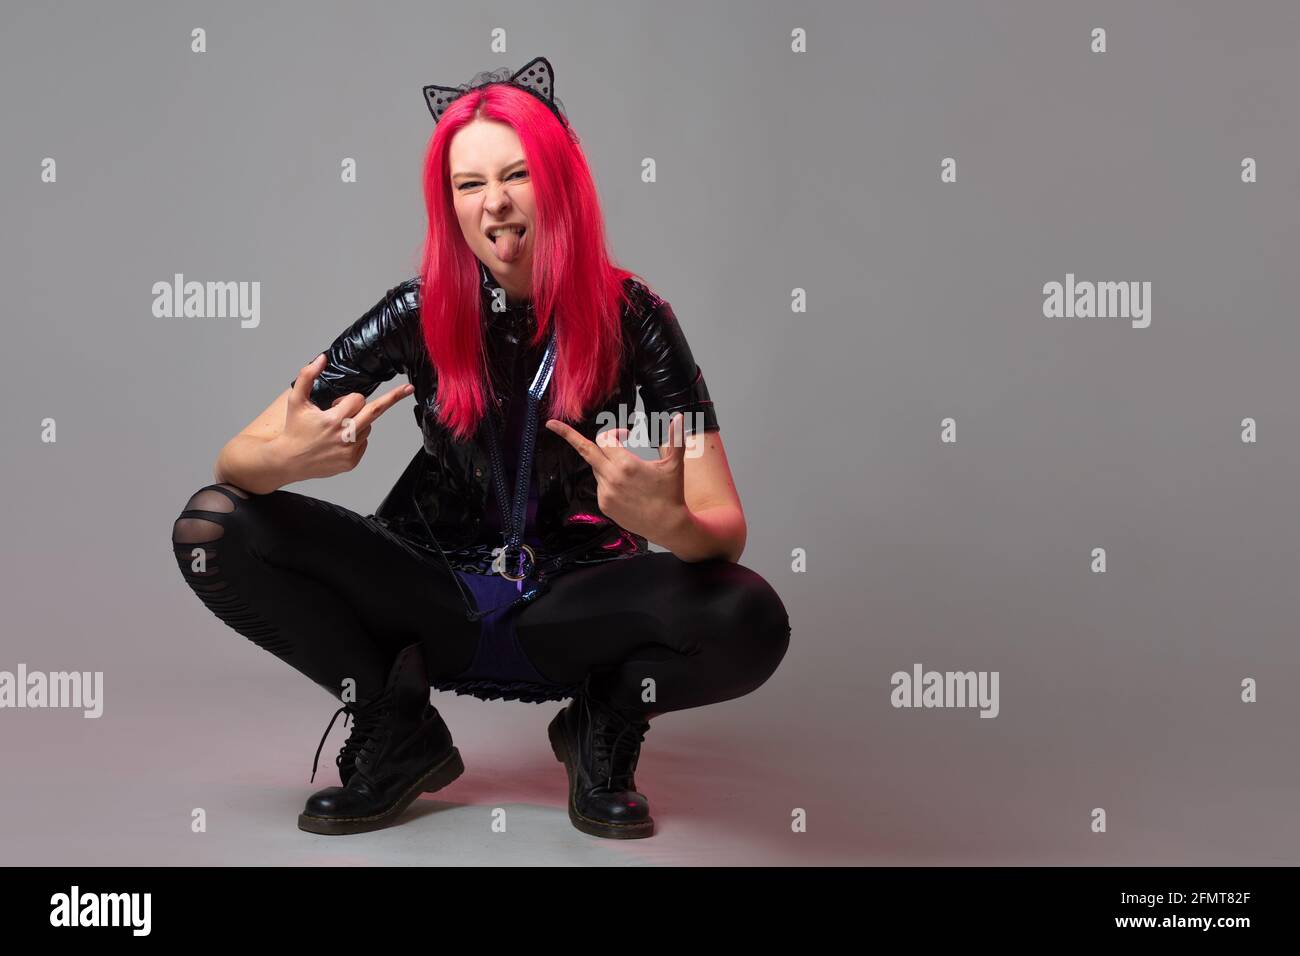 A cheerful and kawaii bully with kitten ears, a young woman with pink hair squatted down. Stock Photo